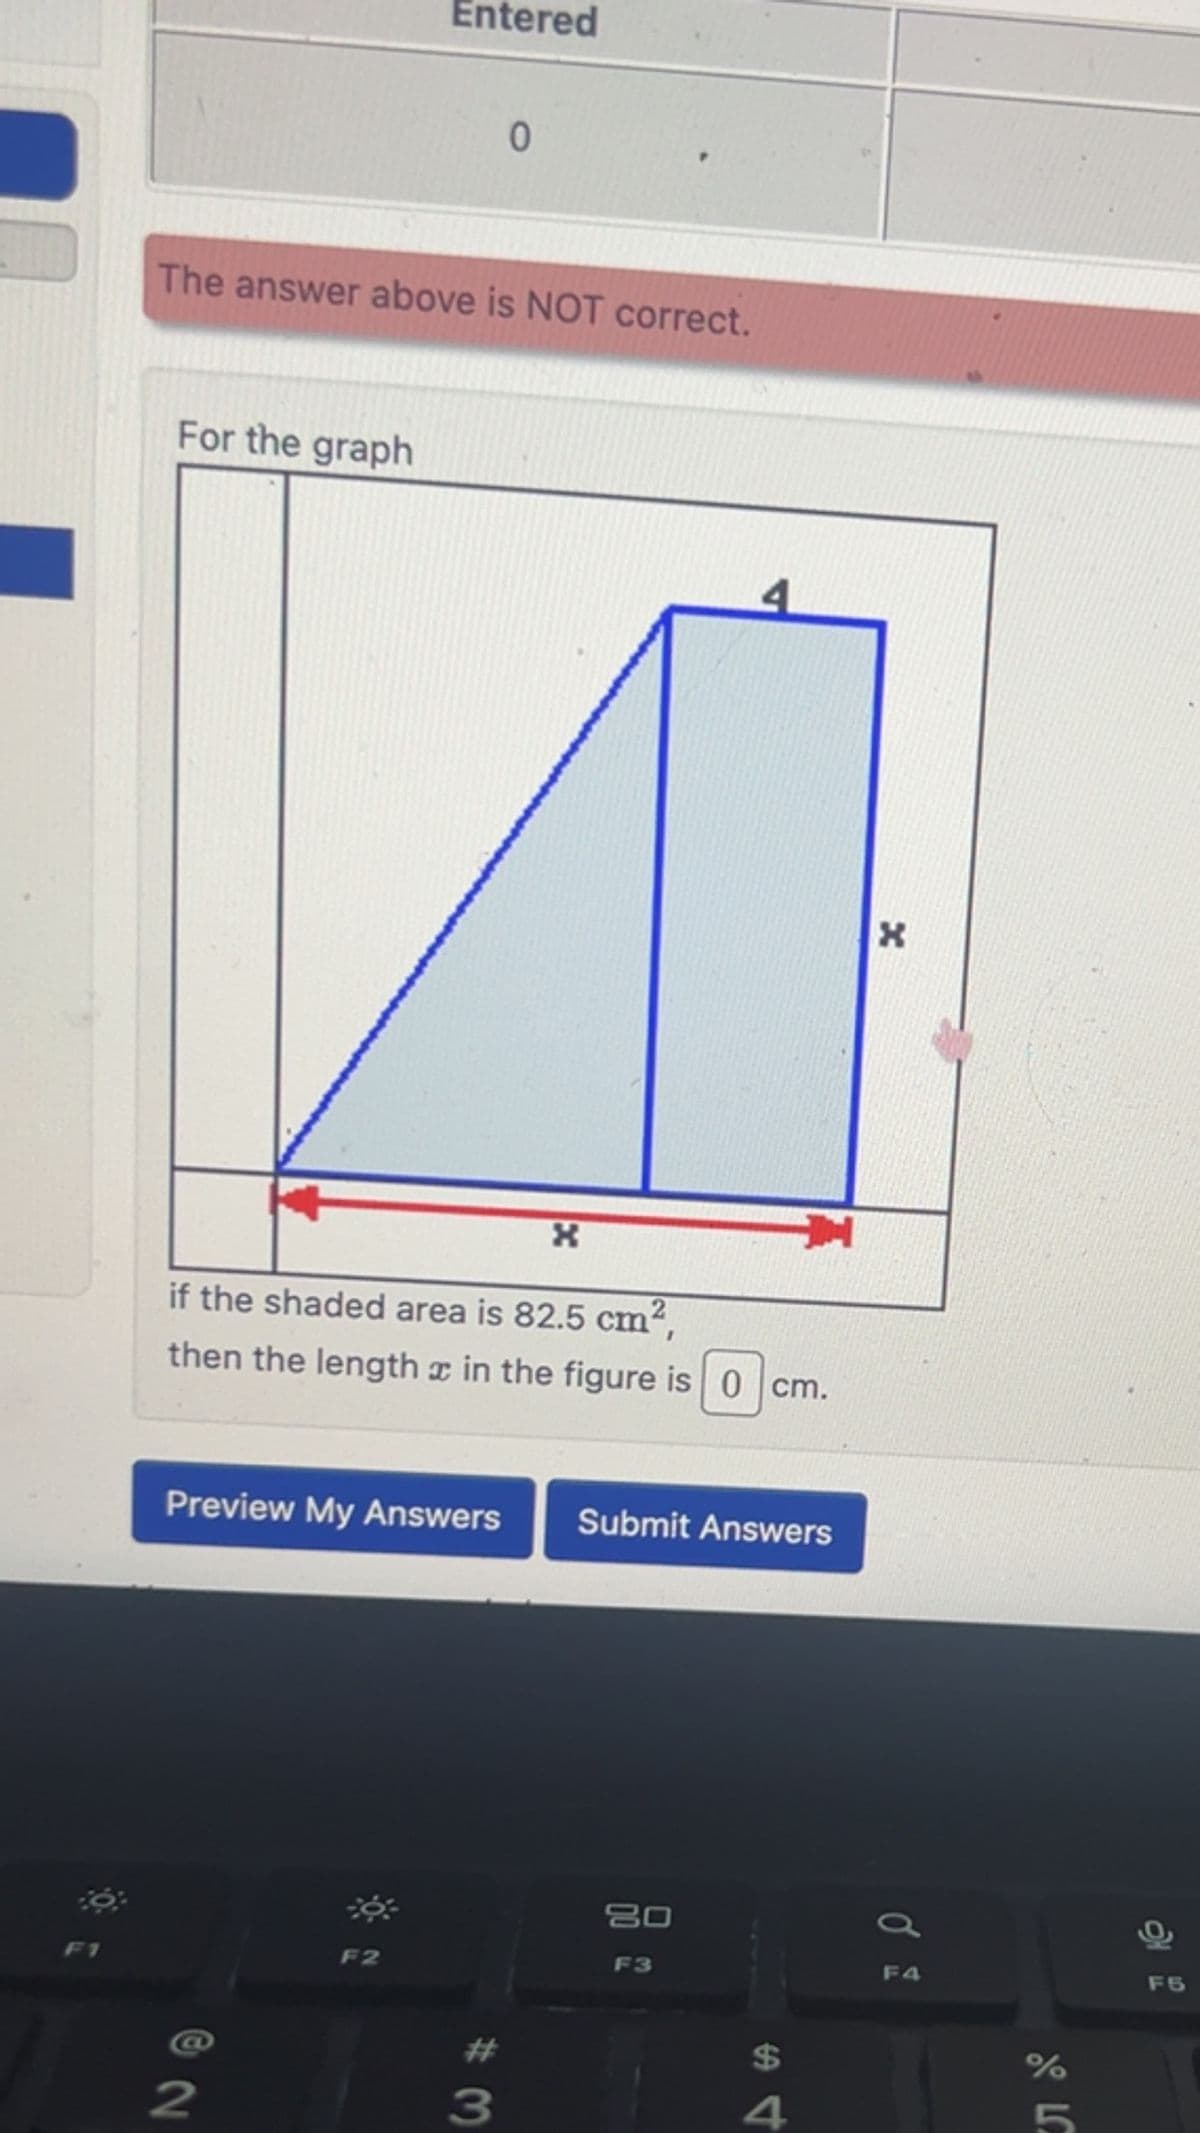 Entered
0
The answer above is NOT correct.
For the graph
F1
*
if the shaded area is 82.5 cm²,
then the length x in the figure is 0 cm.
x
*
Preview My Answers
Submit Answers
2
F2
#3
80
a
F3
54
$
F4
%
Л 20
5
F5